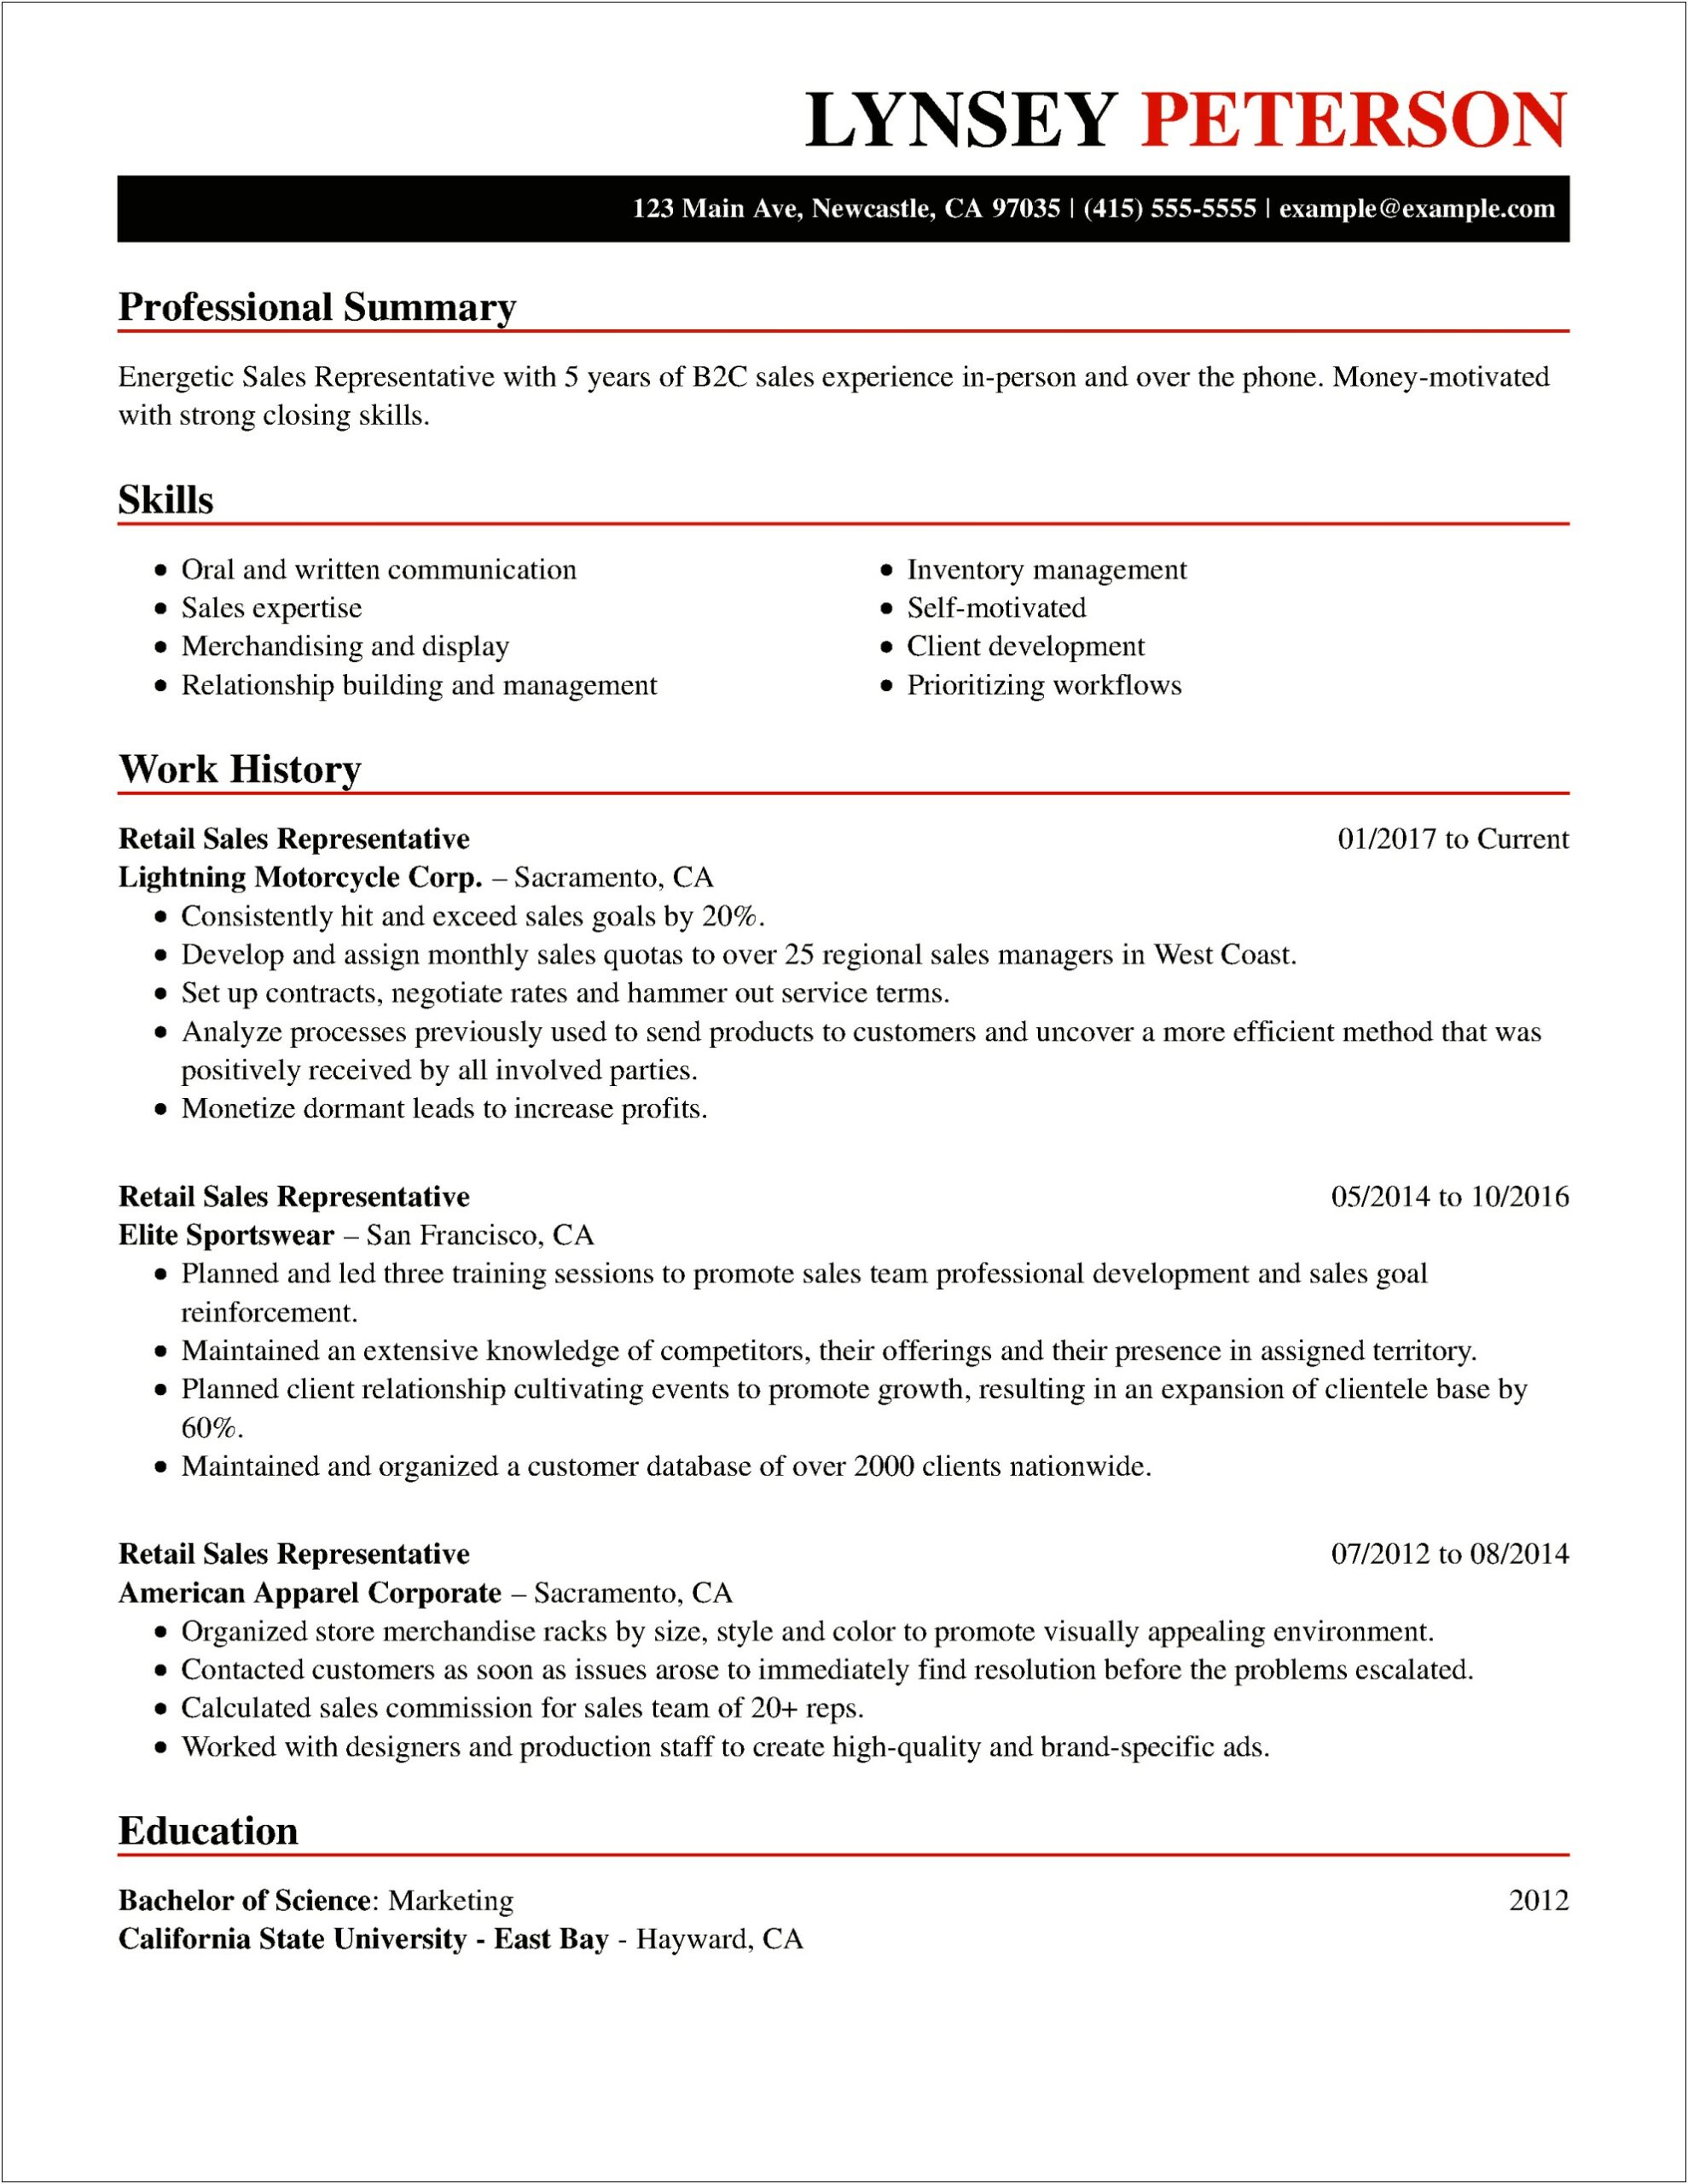 Best Profile Title For Resume